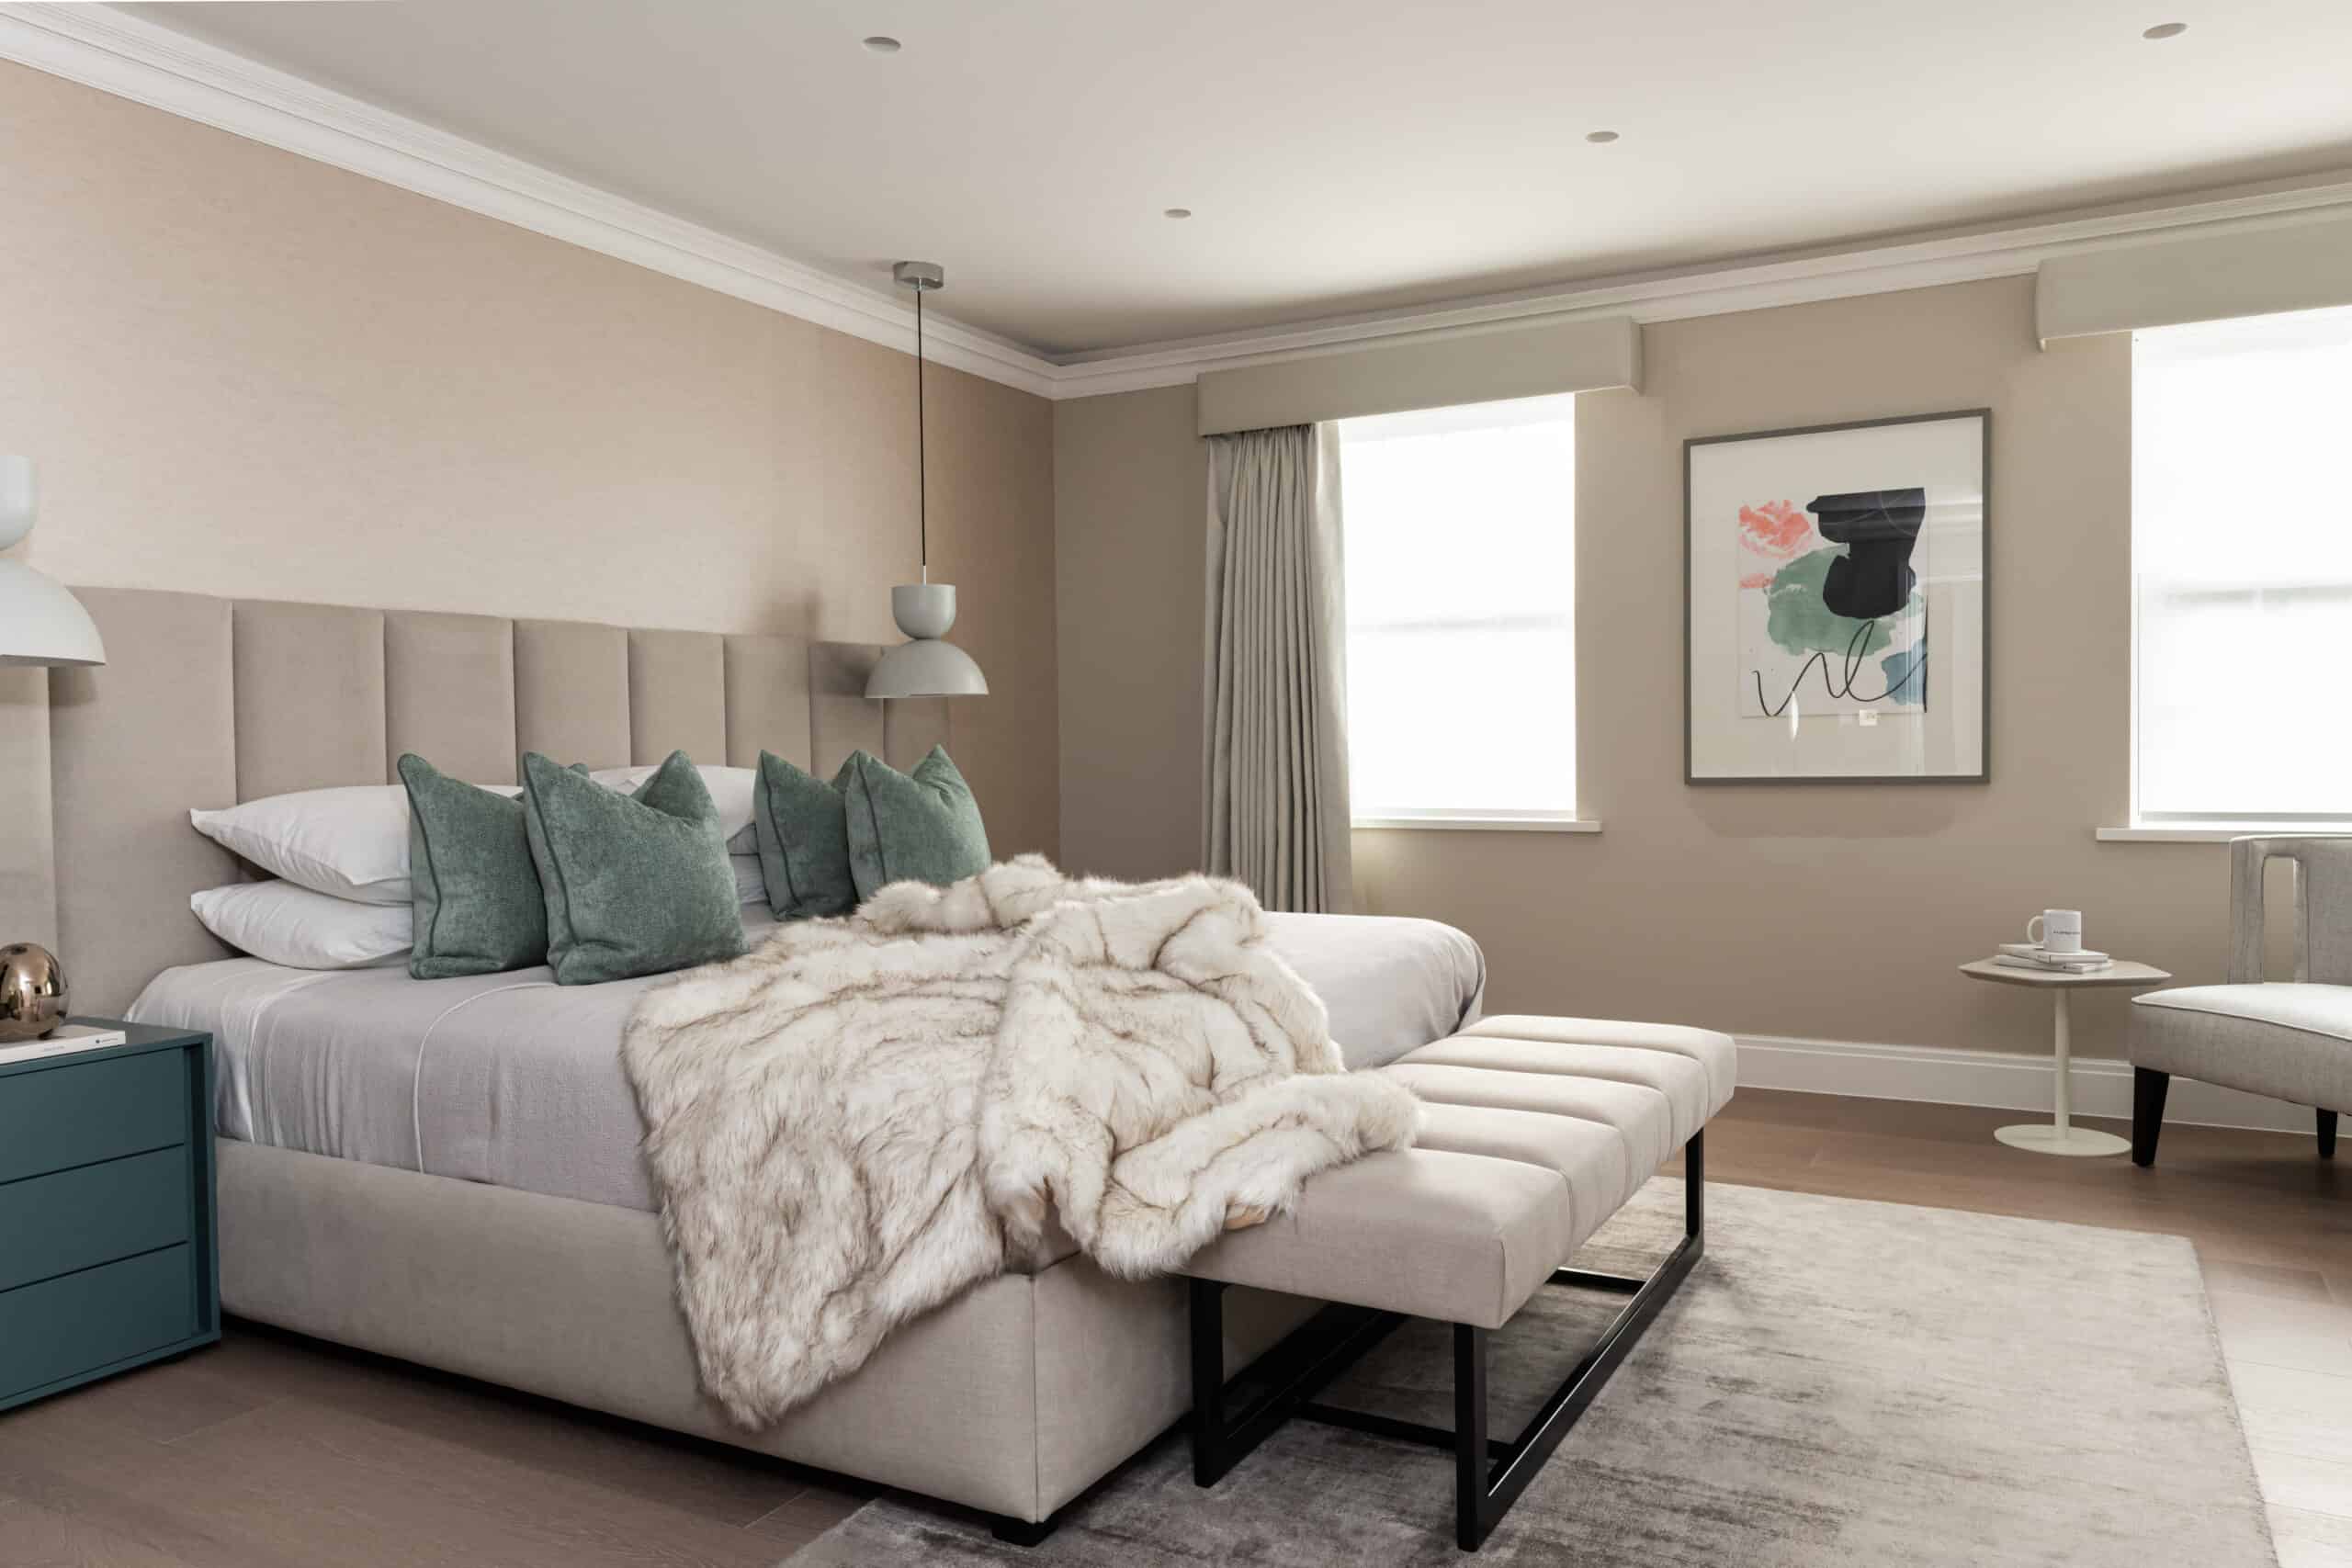 Our Shenfield interior designer used pendants and well-balanced textures through beddings and rugs.